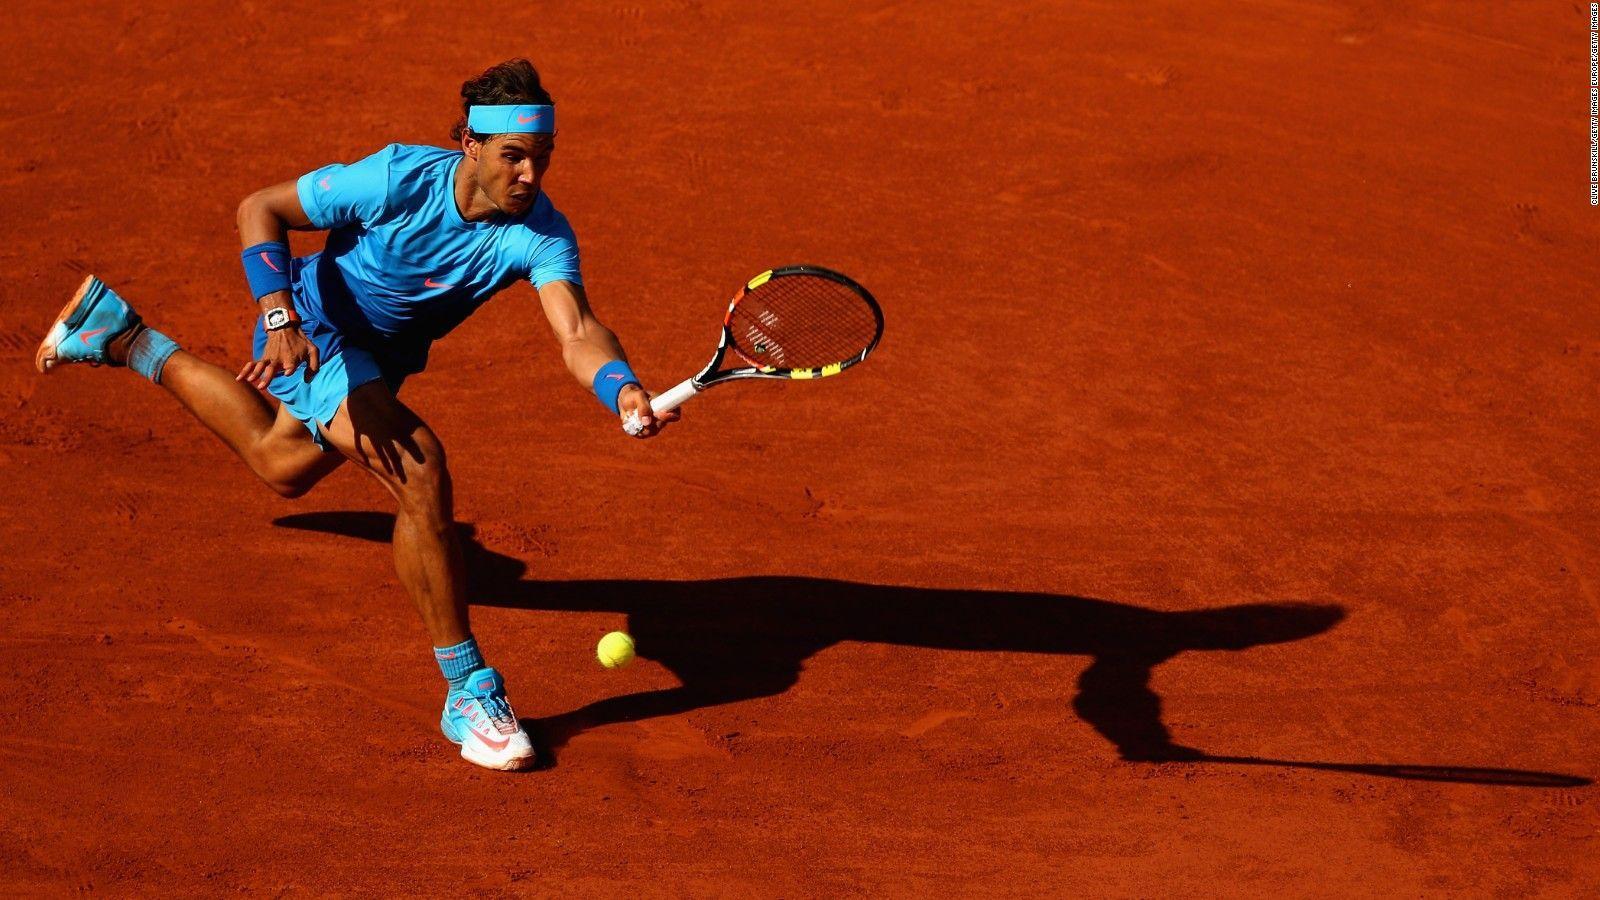 Injured Rafael Nadal pulls out of French Open